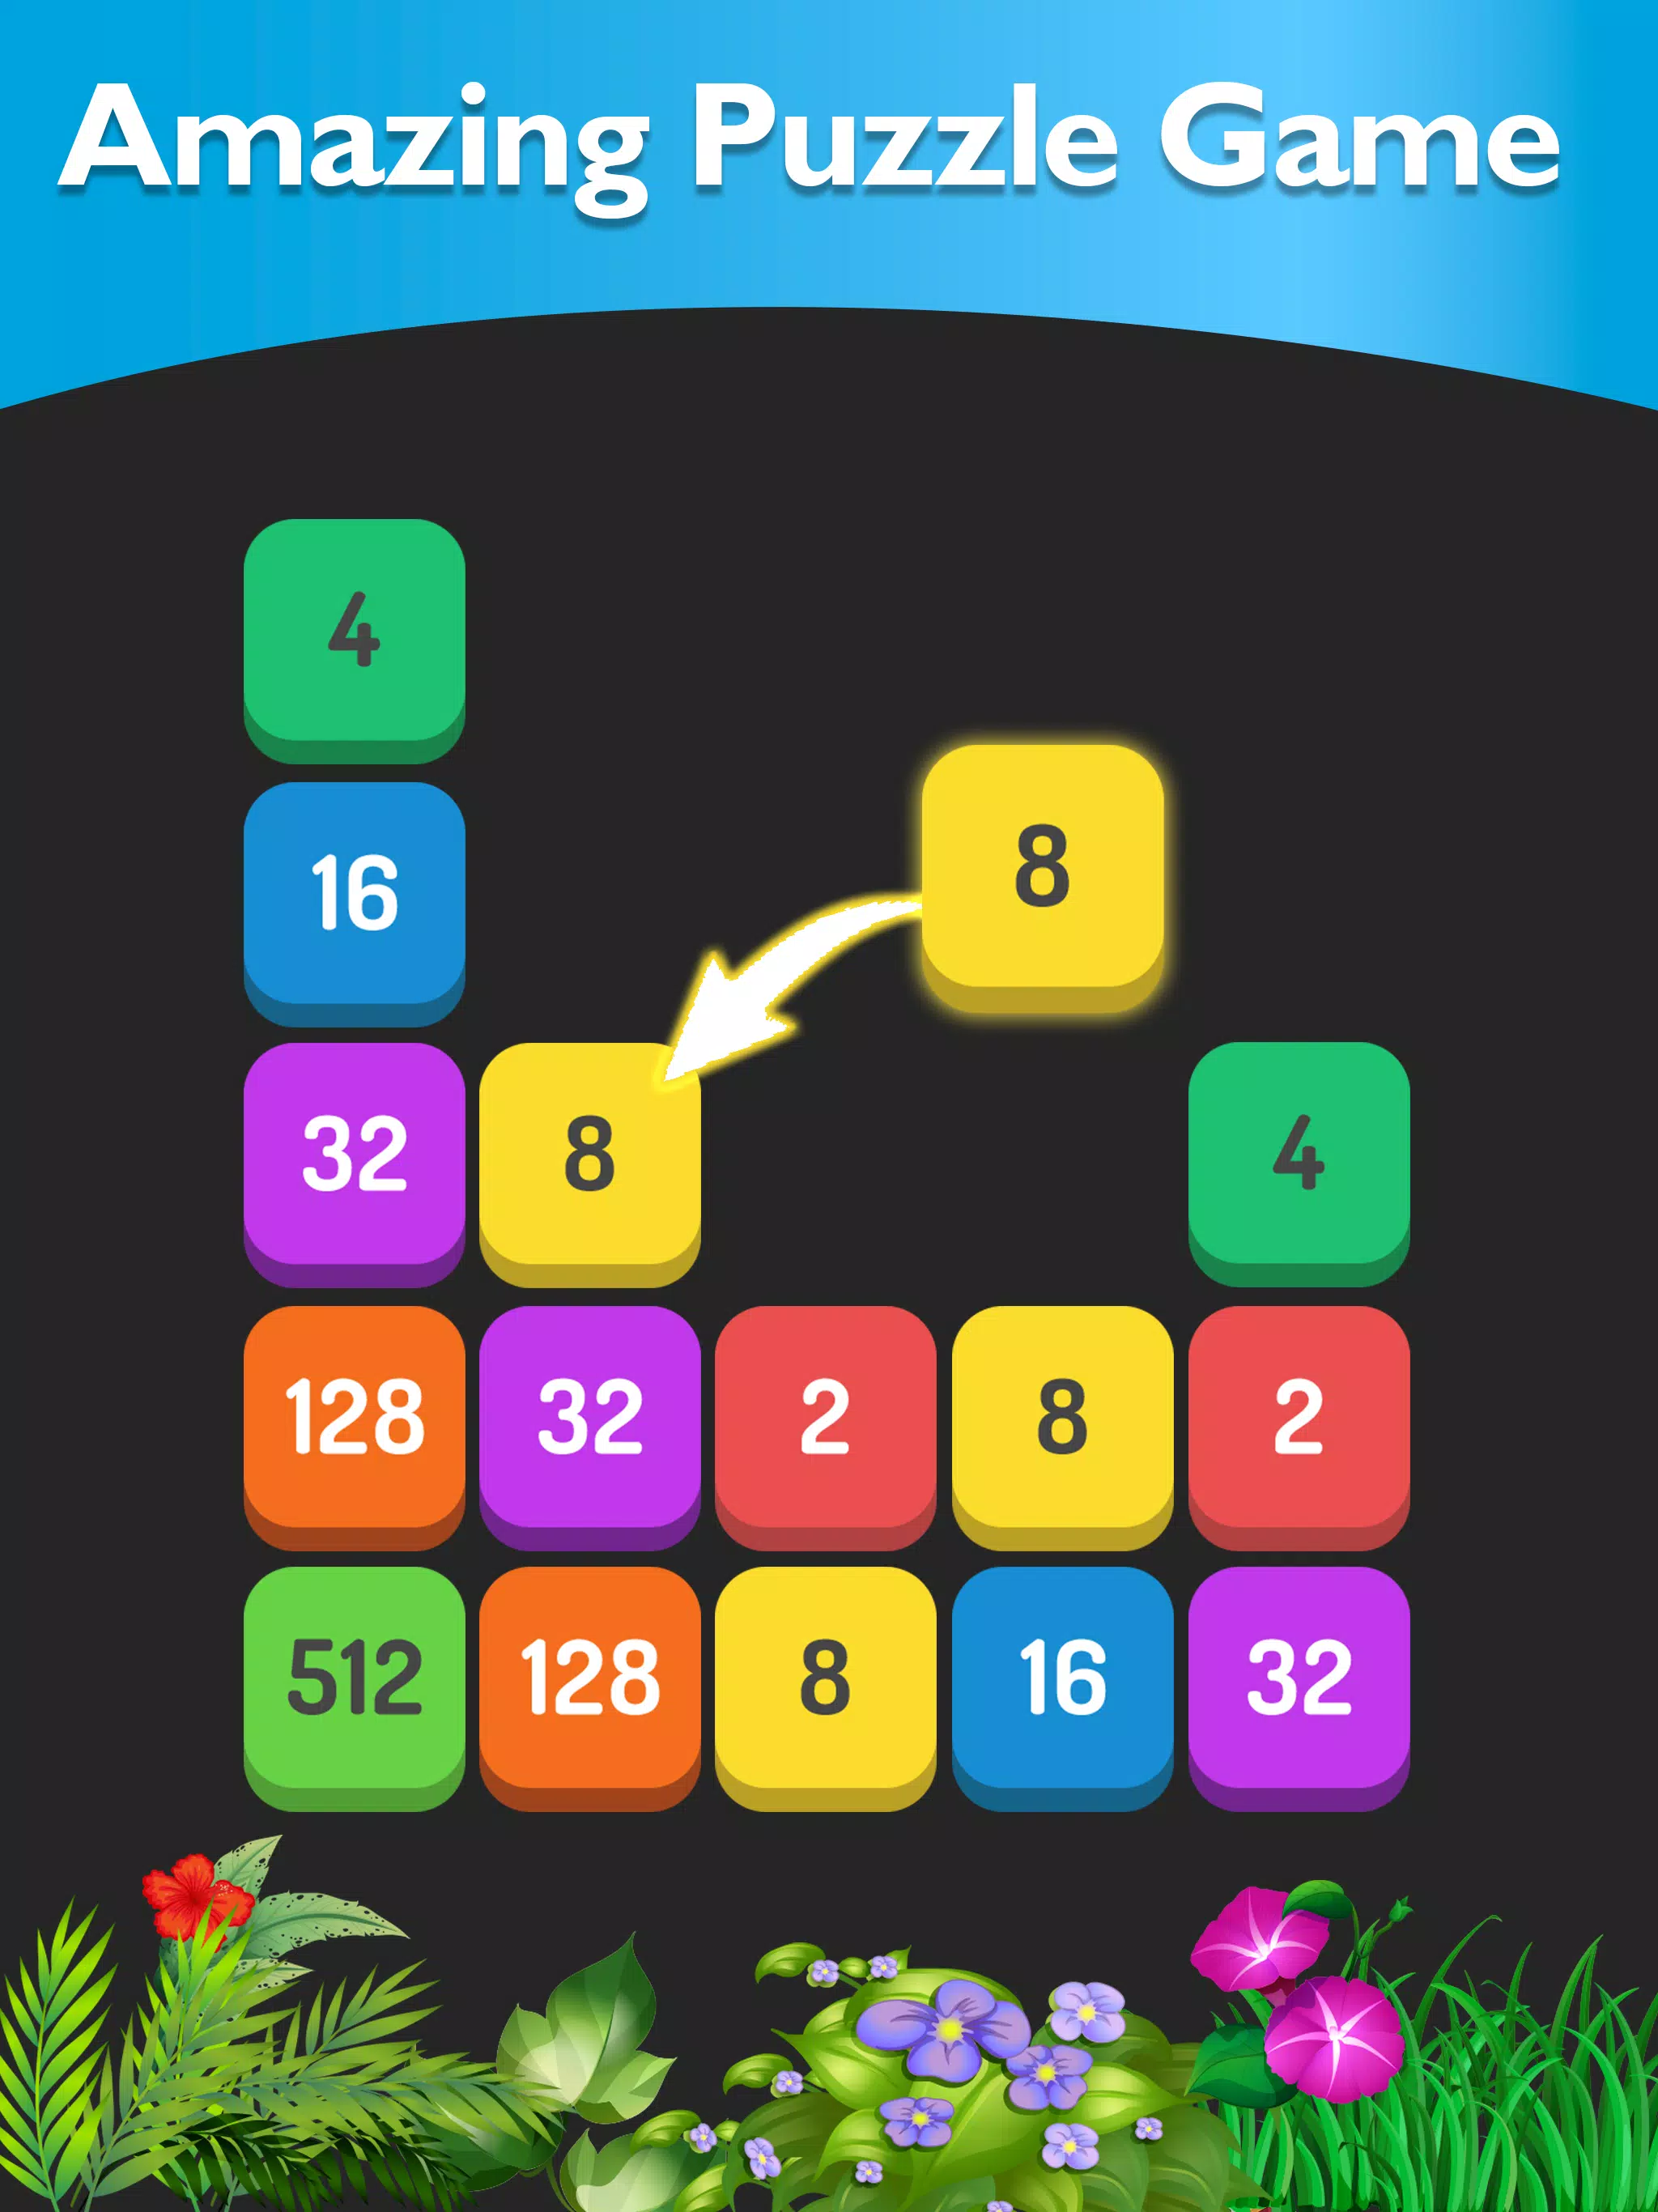 2048 Number puzzle game - Download & Play for Free Here